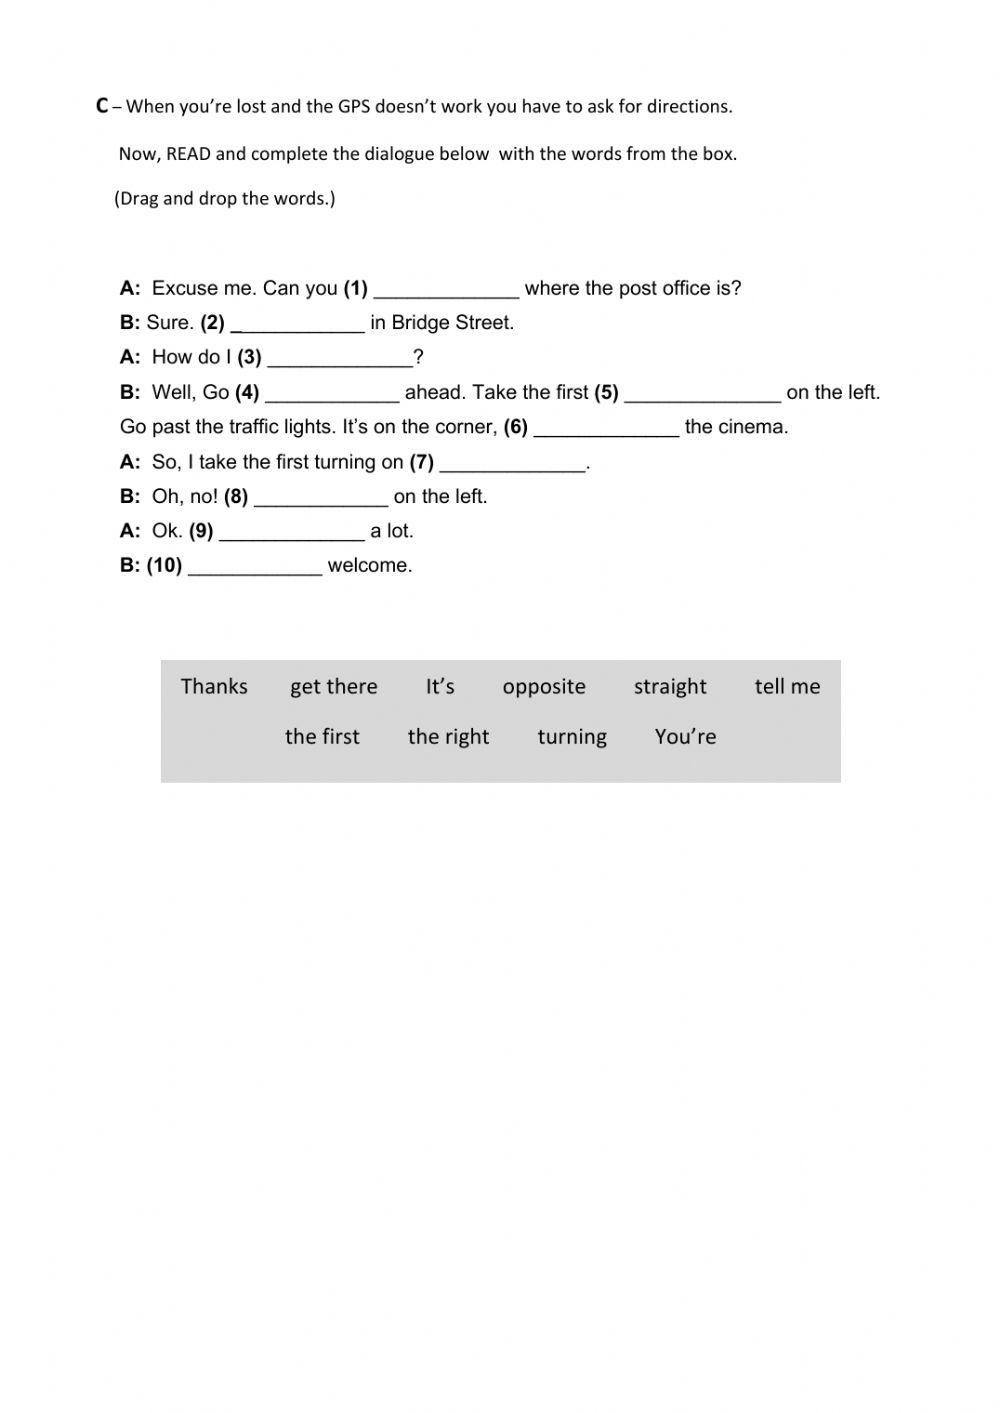 Giving Directions - Listening and Reading Worksheet